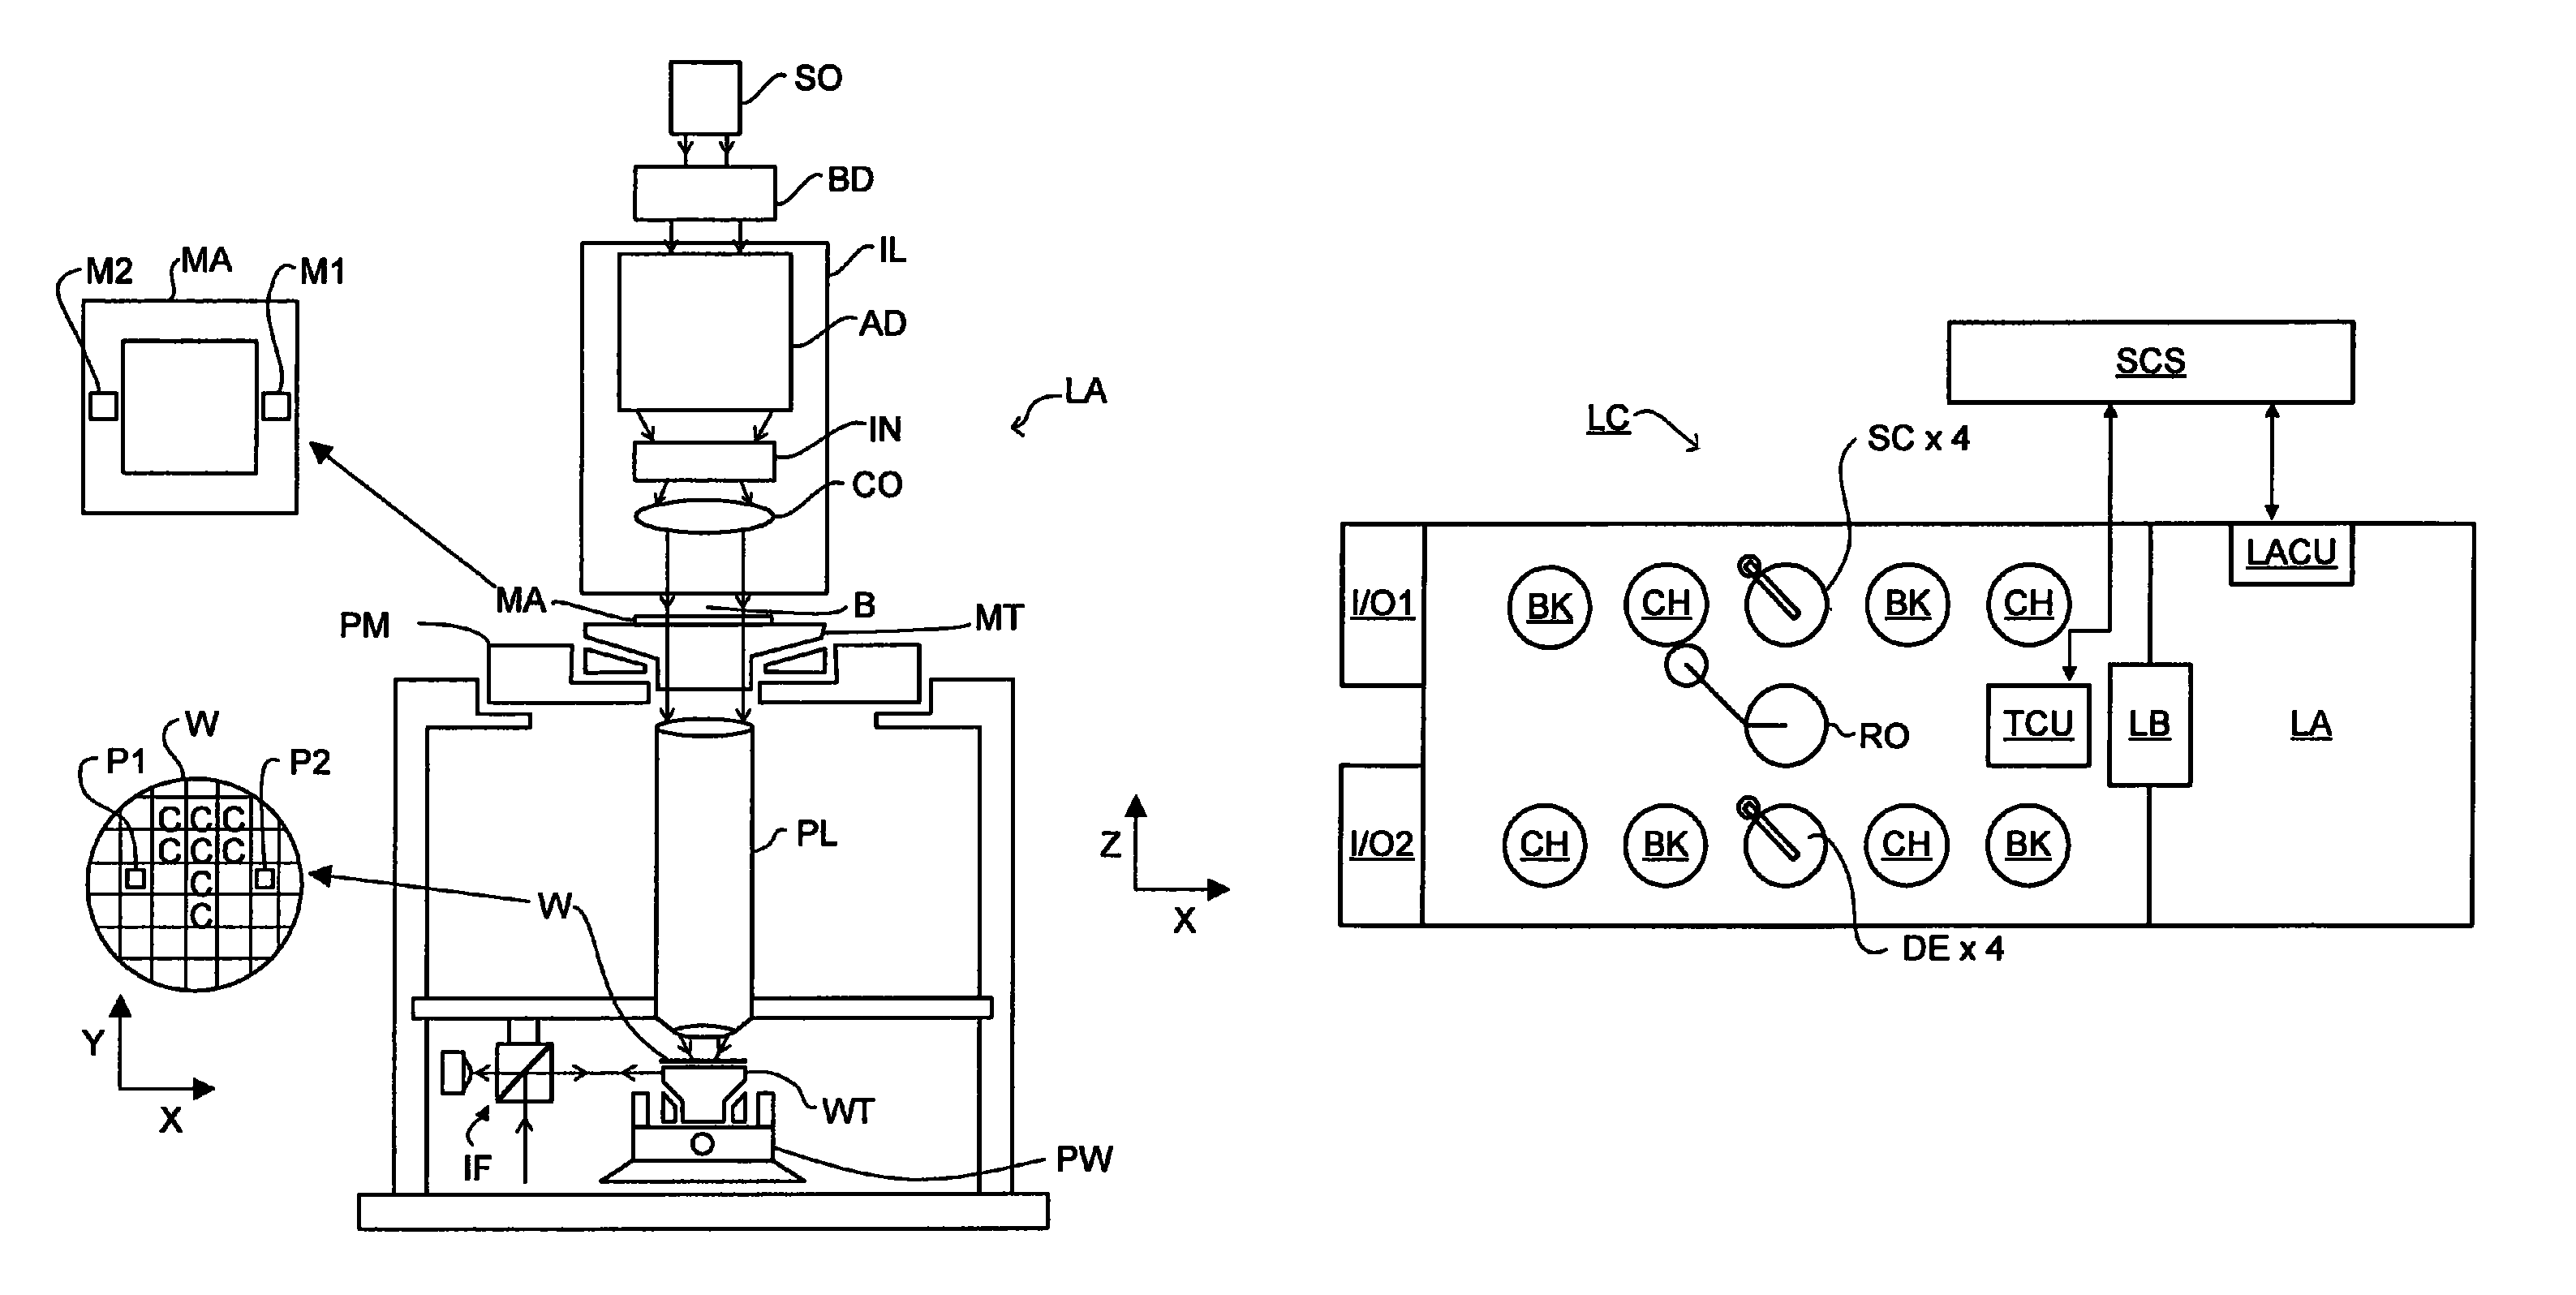 Inspection apparatus for lithography